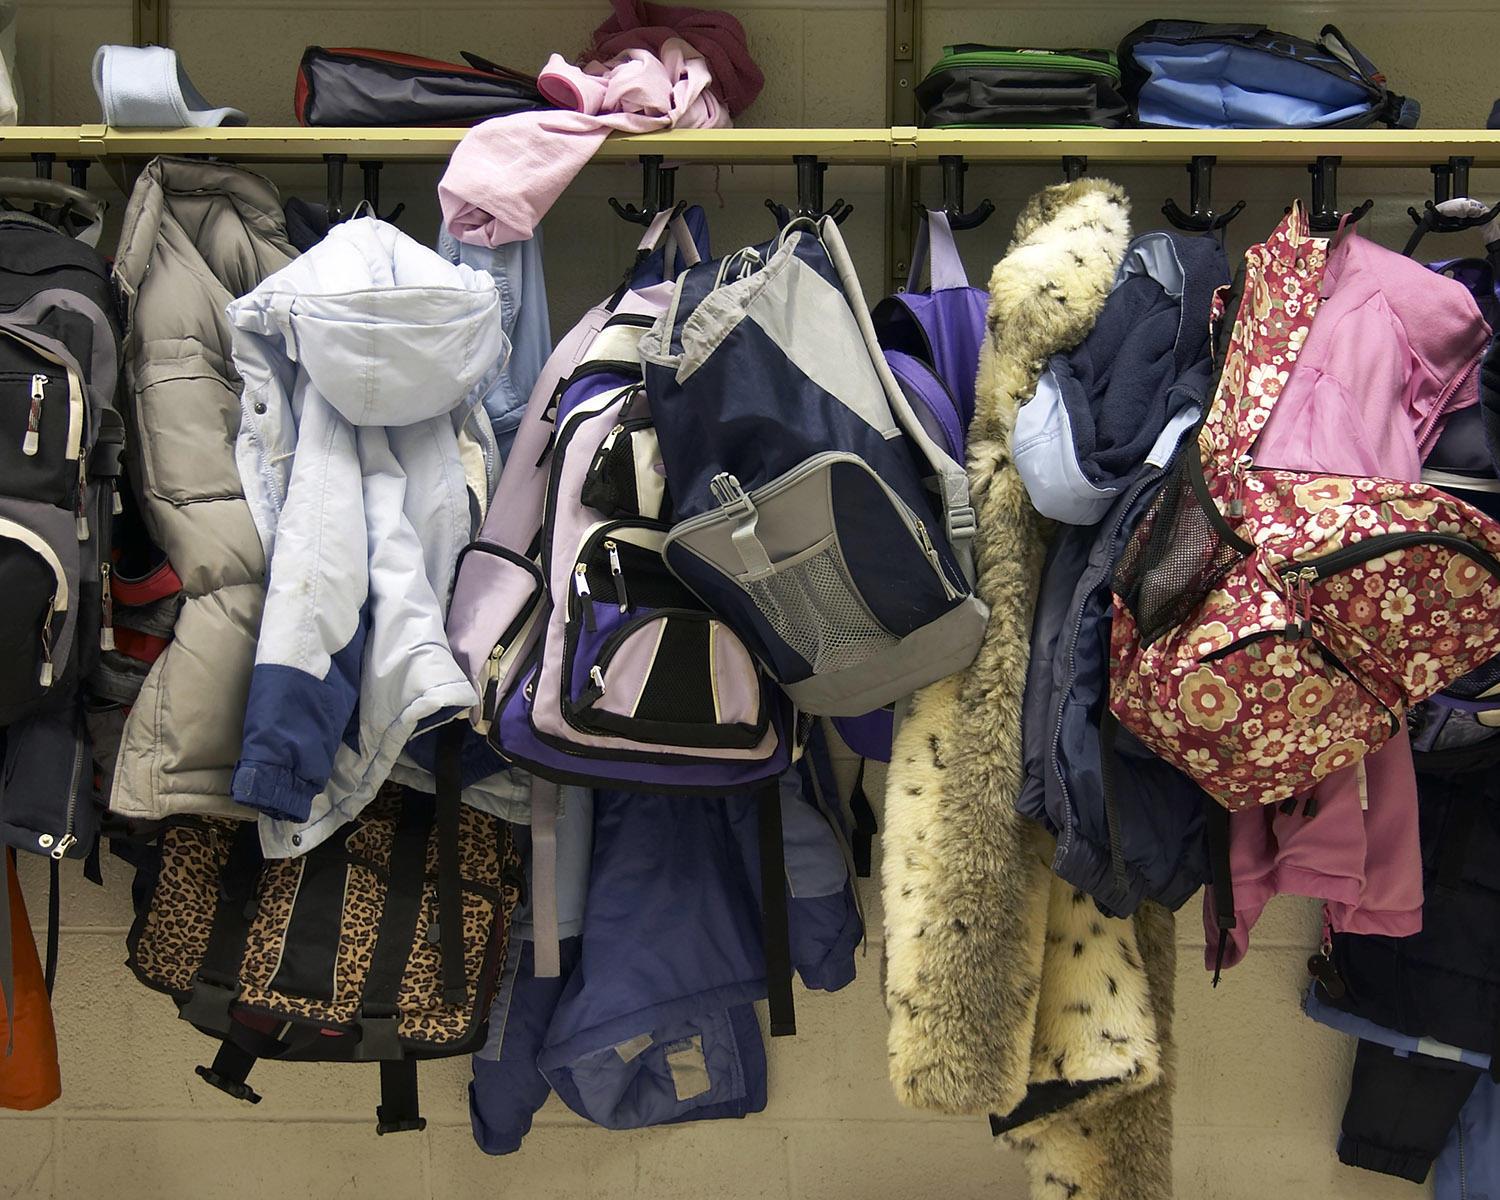 backpacks and coats in cluster on rack